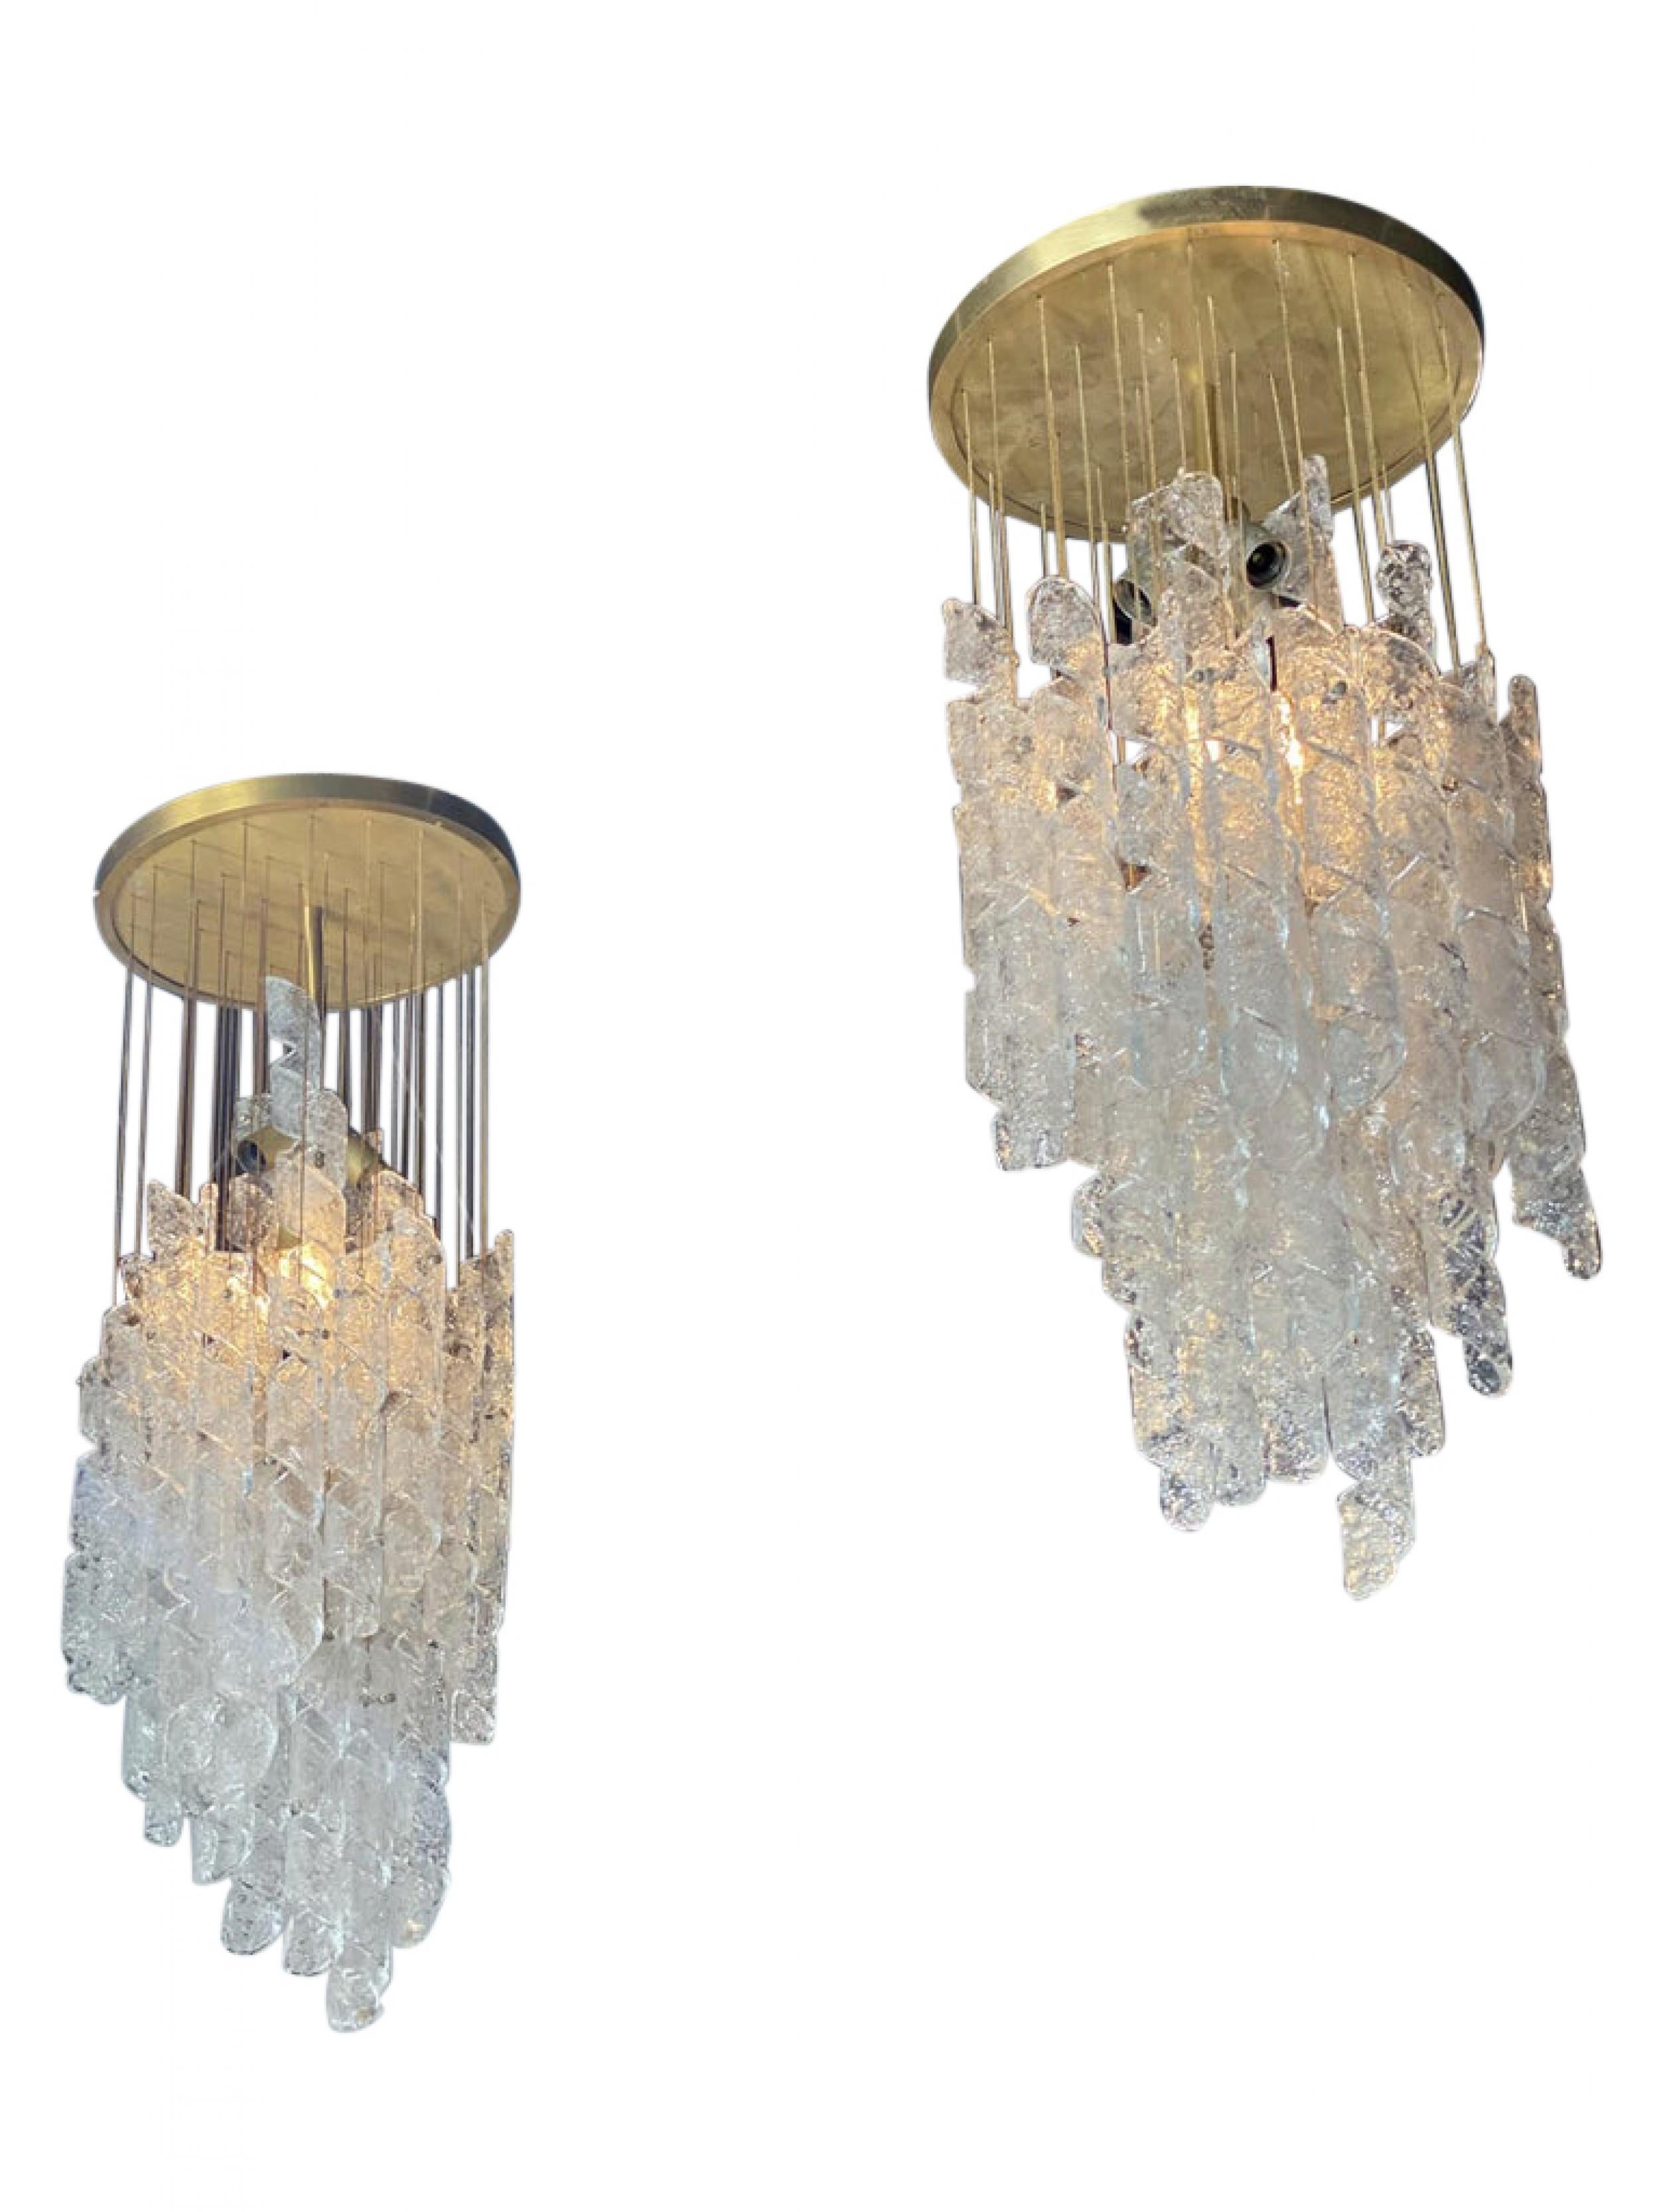 Pair of Italian Modern Hand Blown Glass and Brass Chandeliers, Mazzega For Sale 2